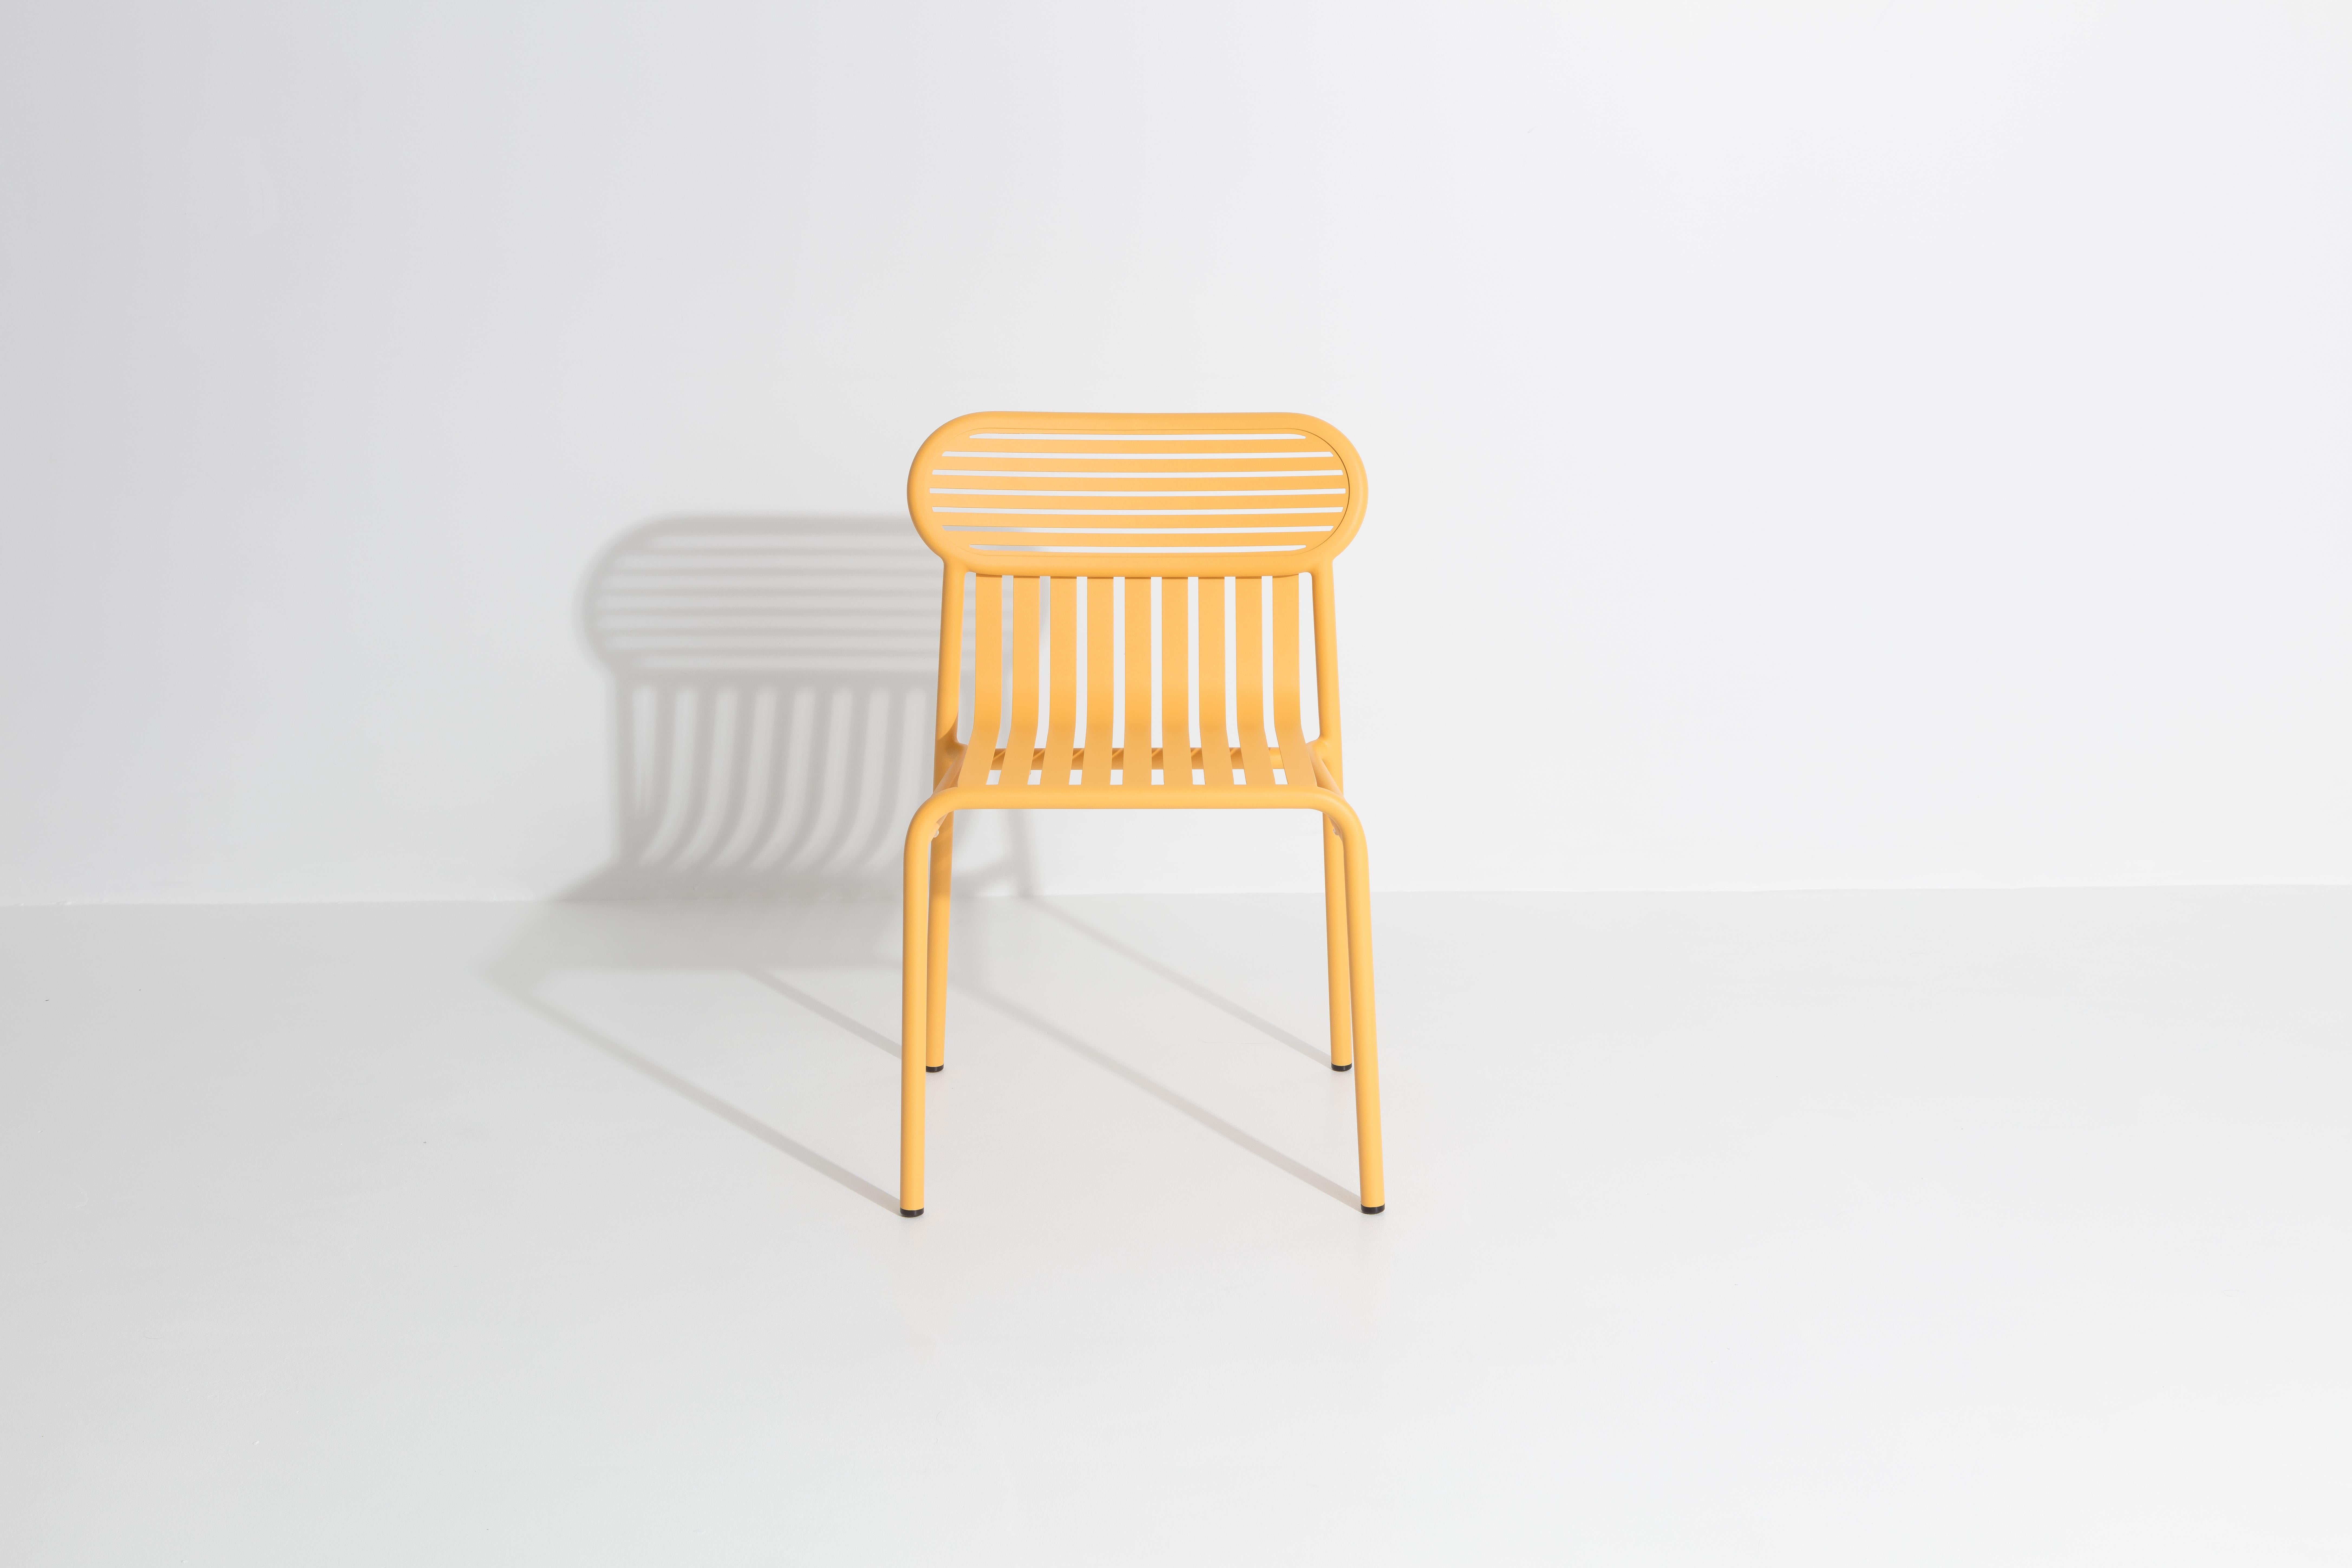 Petite Friture Week-End Chair in Saffron Aluminium by Studio BrichetZiegler, 2017

The week-end collection is a full range of outdoor furniture, in aluminium grained epoxy paint, matt finish, that includes 18 functions and 8 colours for the retail